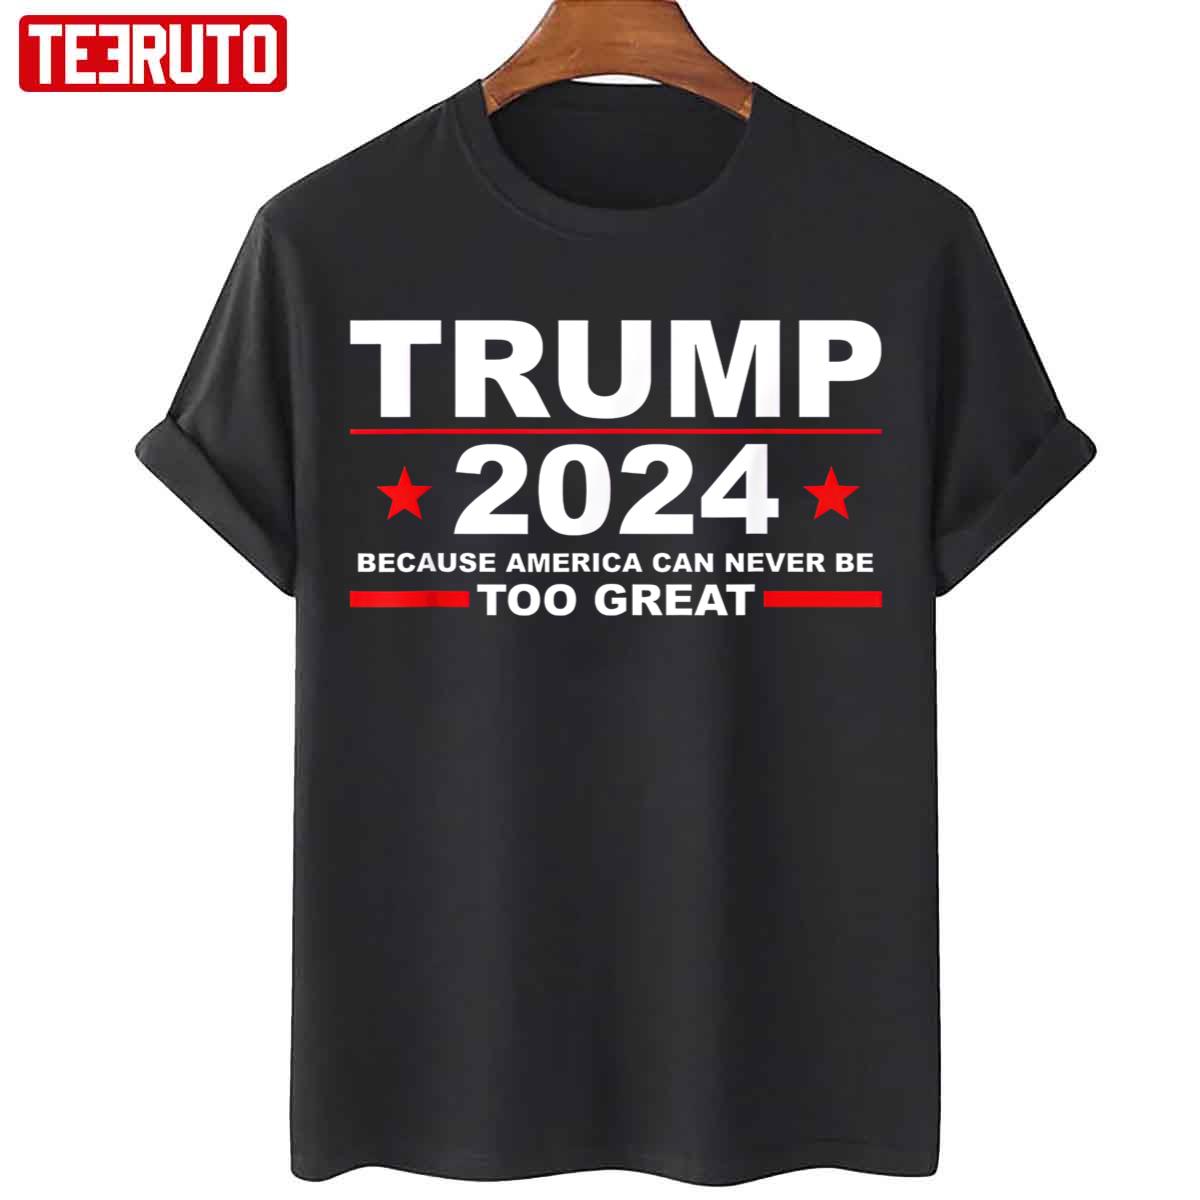 Trump 2024 Because America Can Never Be Too Great Funny Unisex T-Shirt